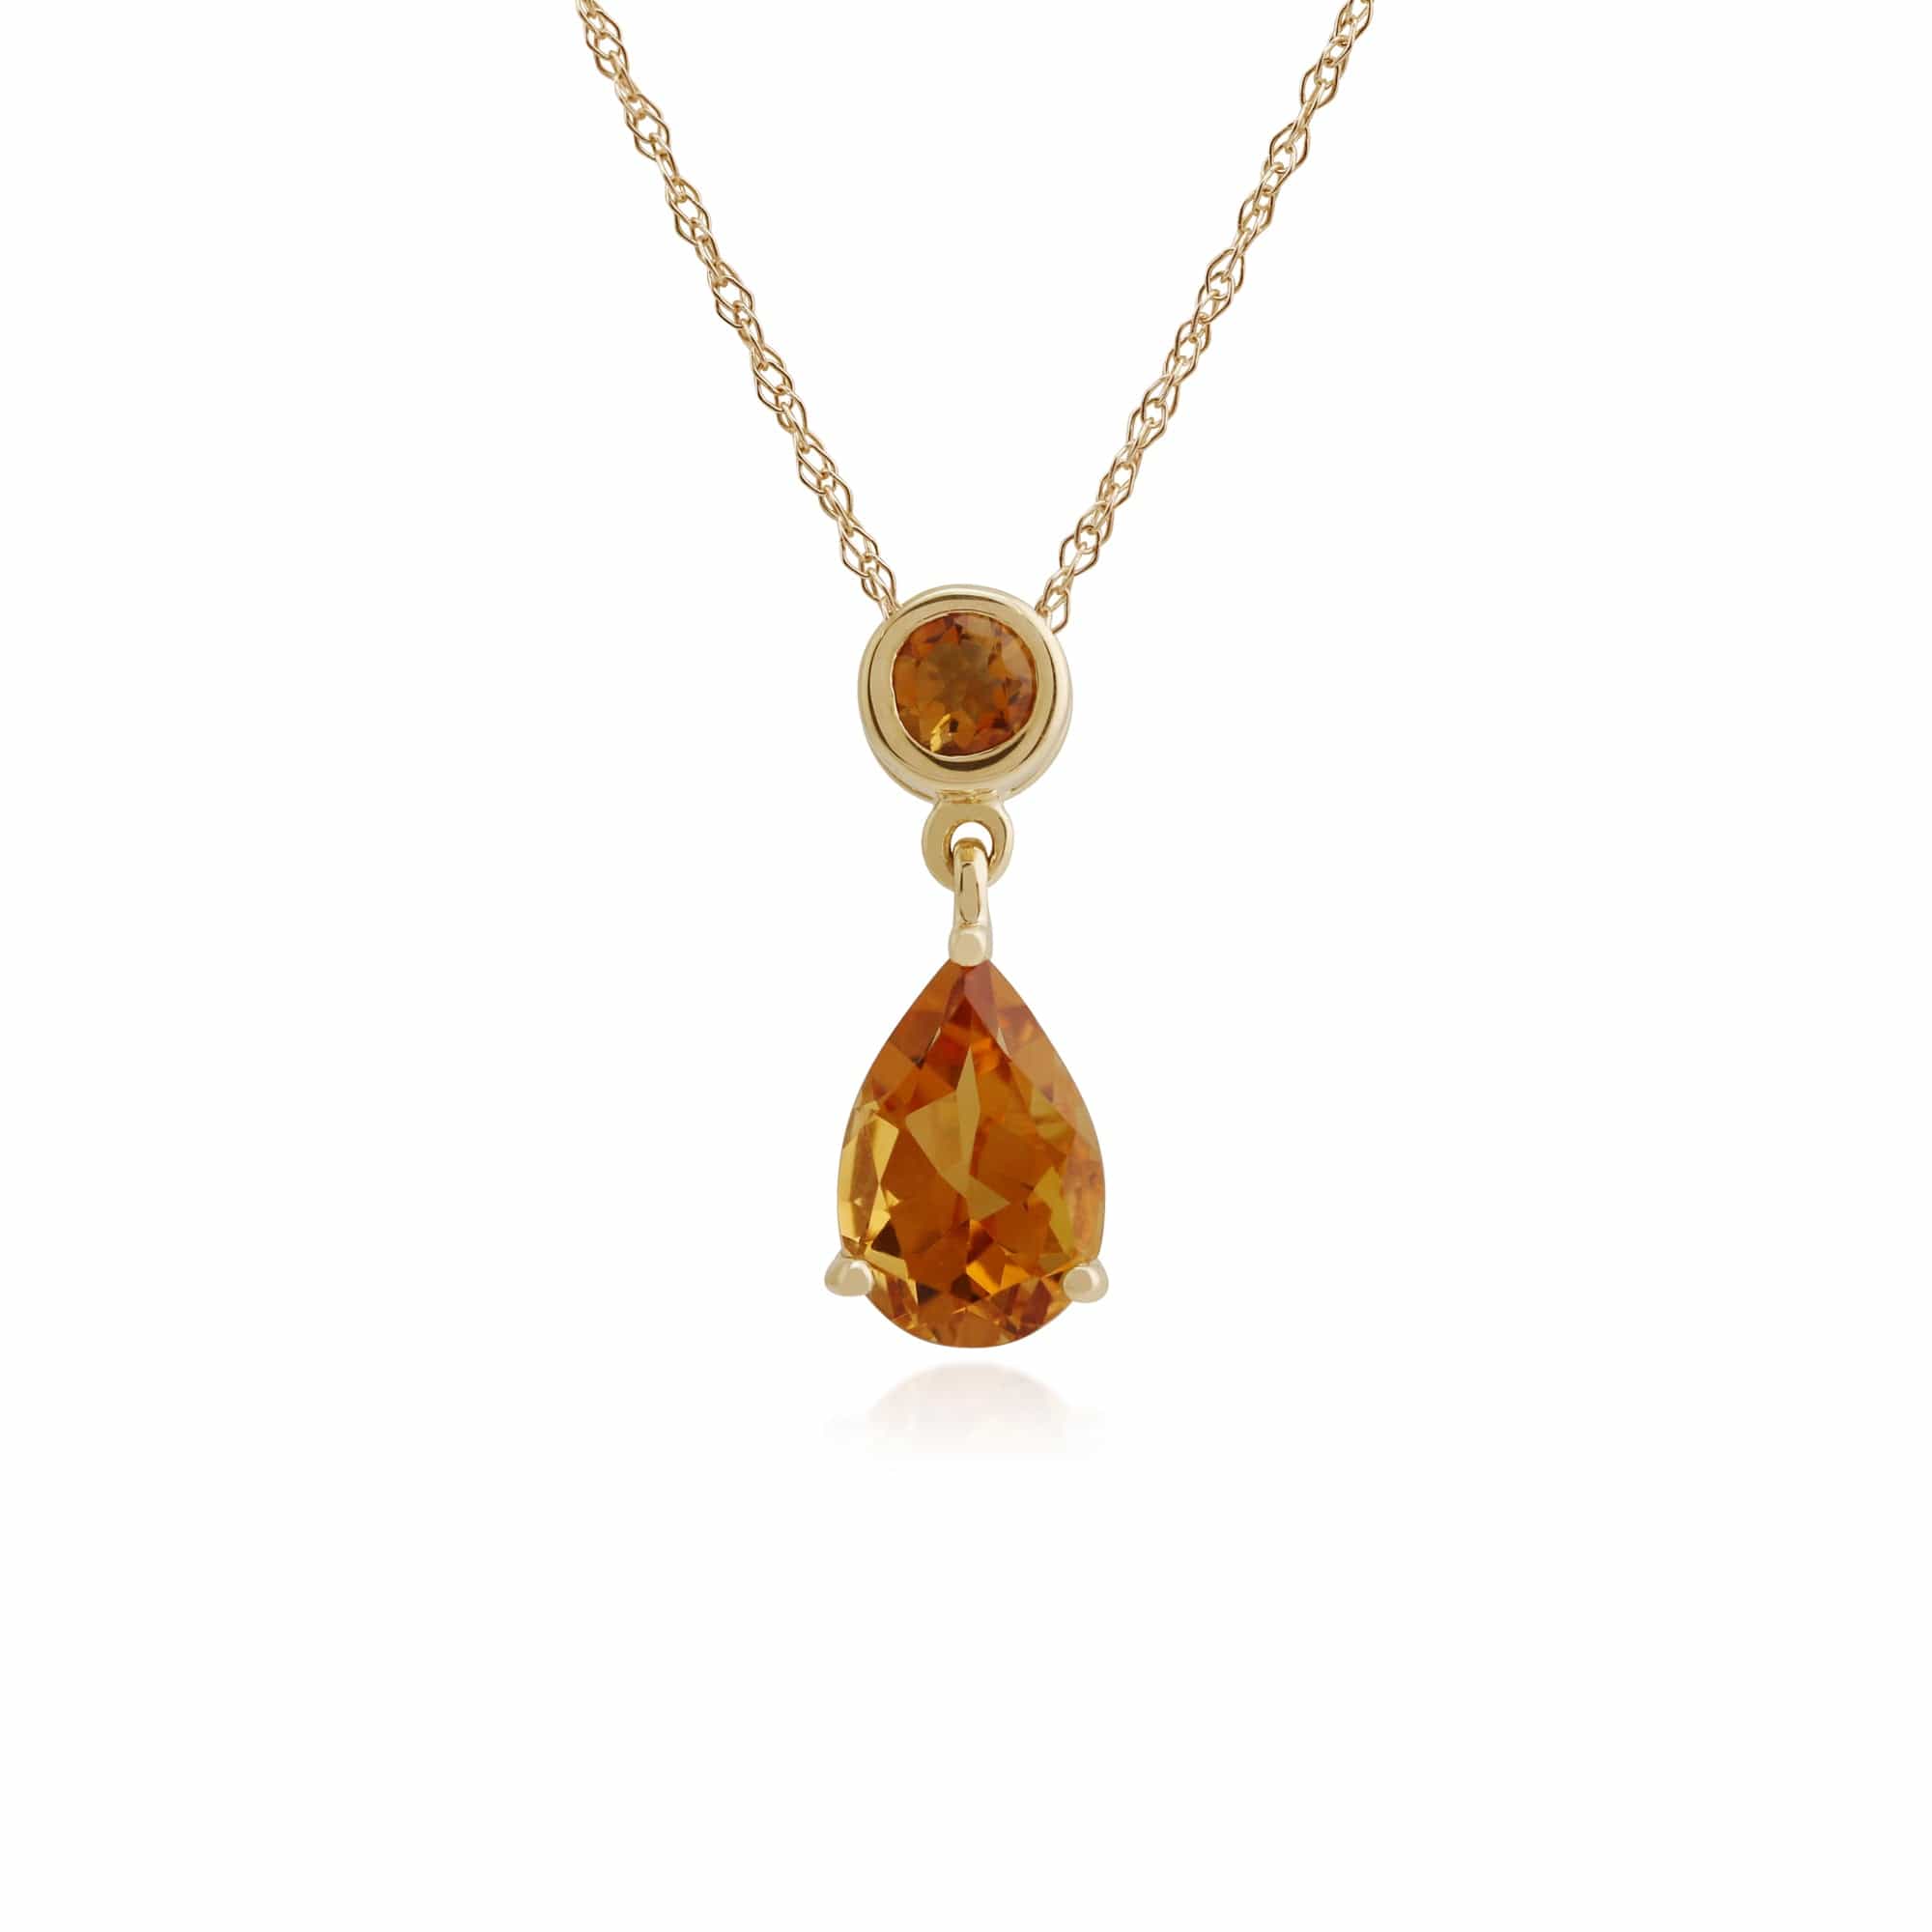 Photos - Pendant / Choker Necklace Classic Pear & Round Citrine Pendant in 9ct Yellow Gold